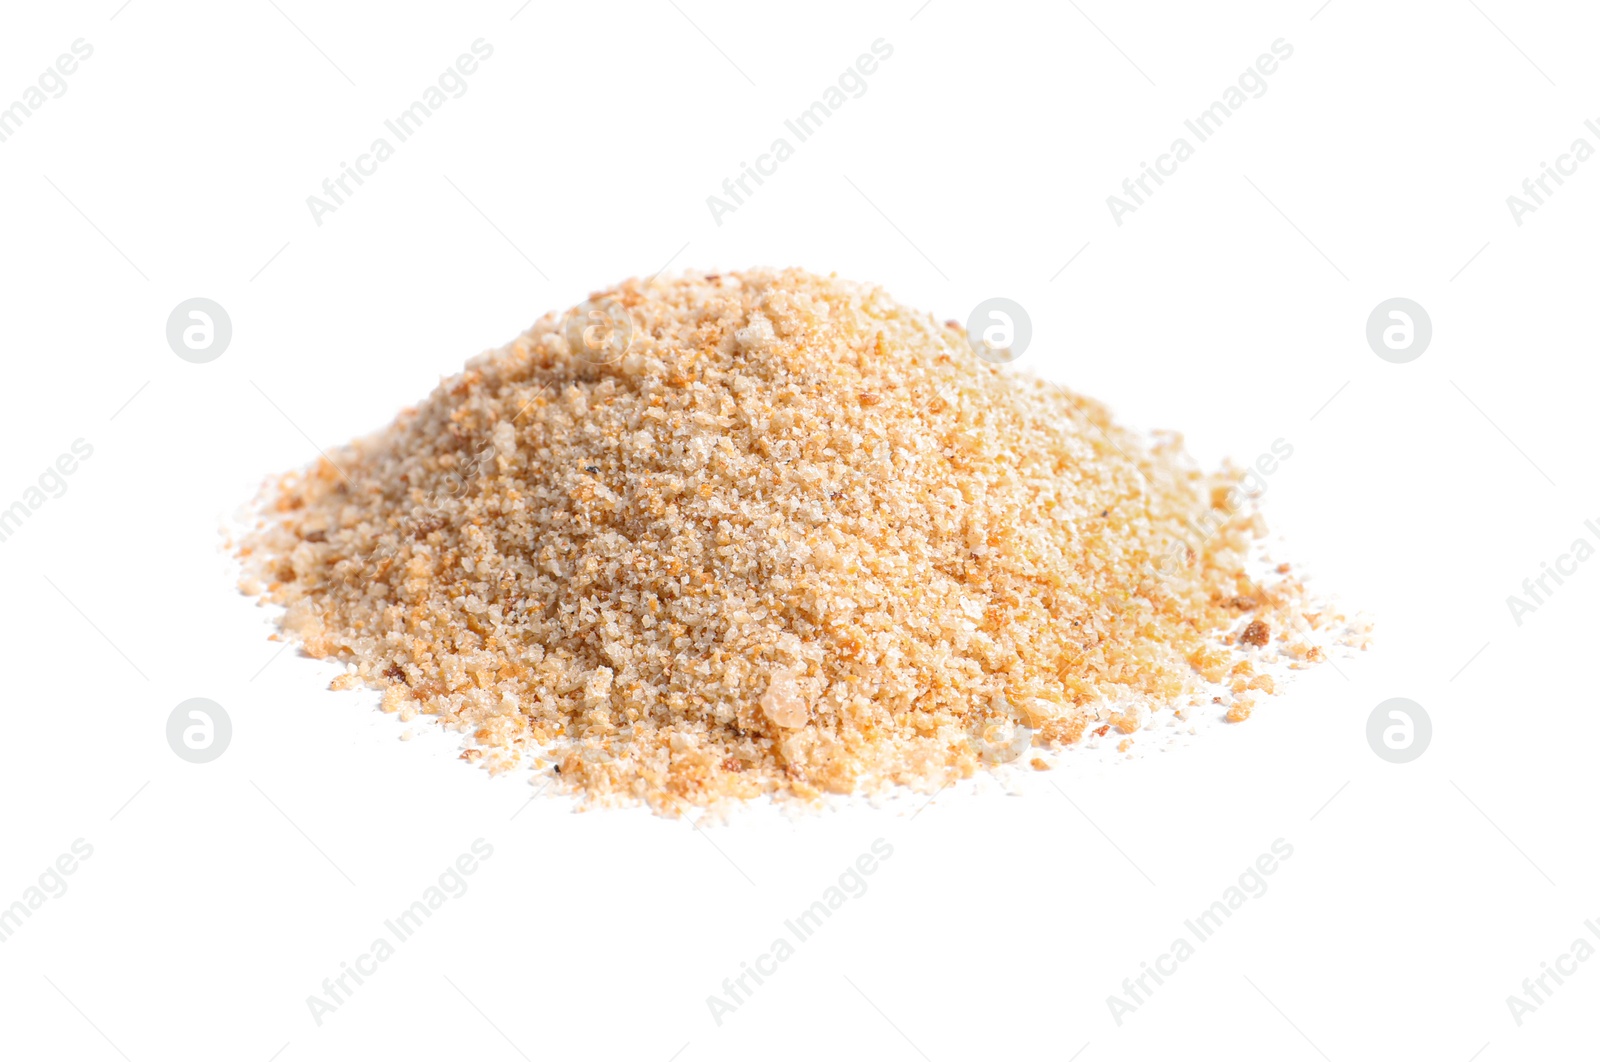 Photo of Pile of fresh bread crumbs isolated on white